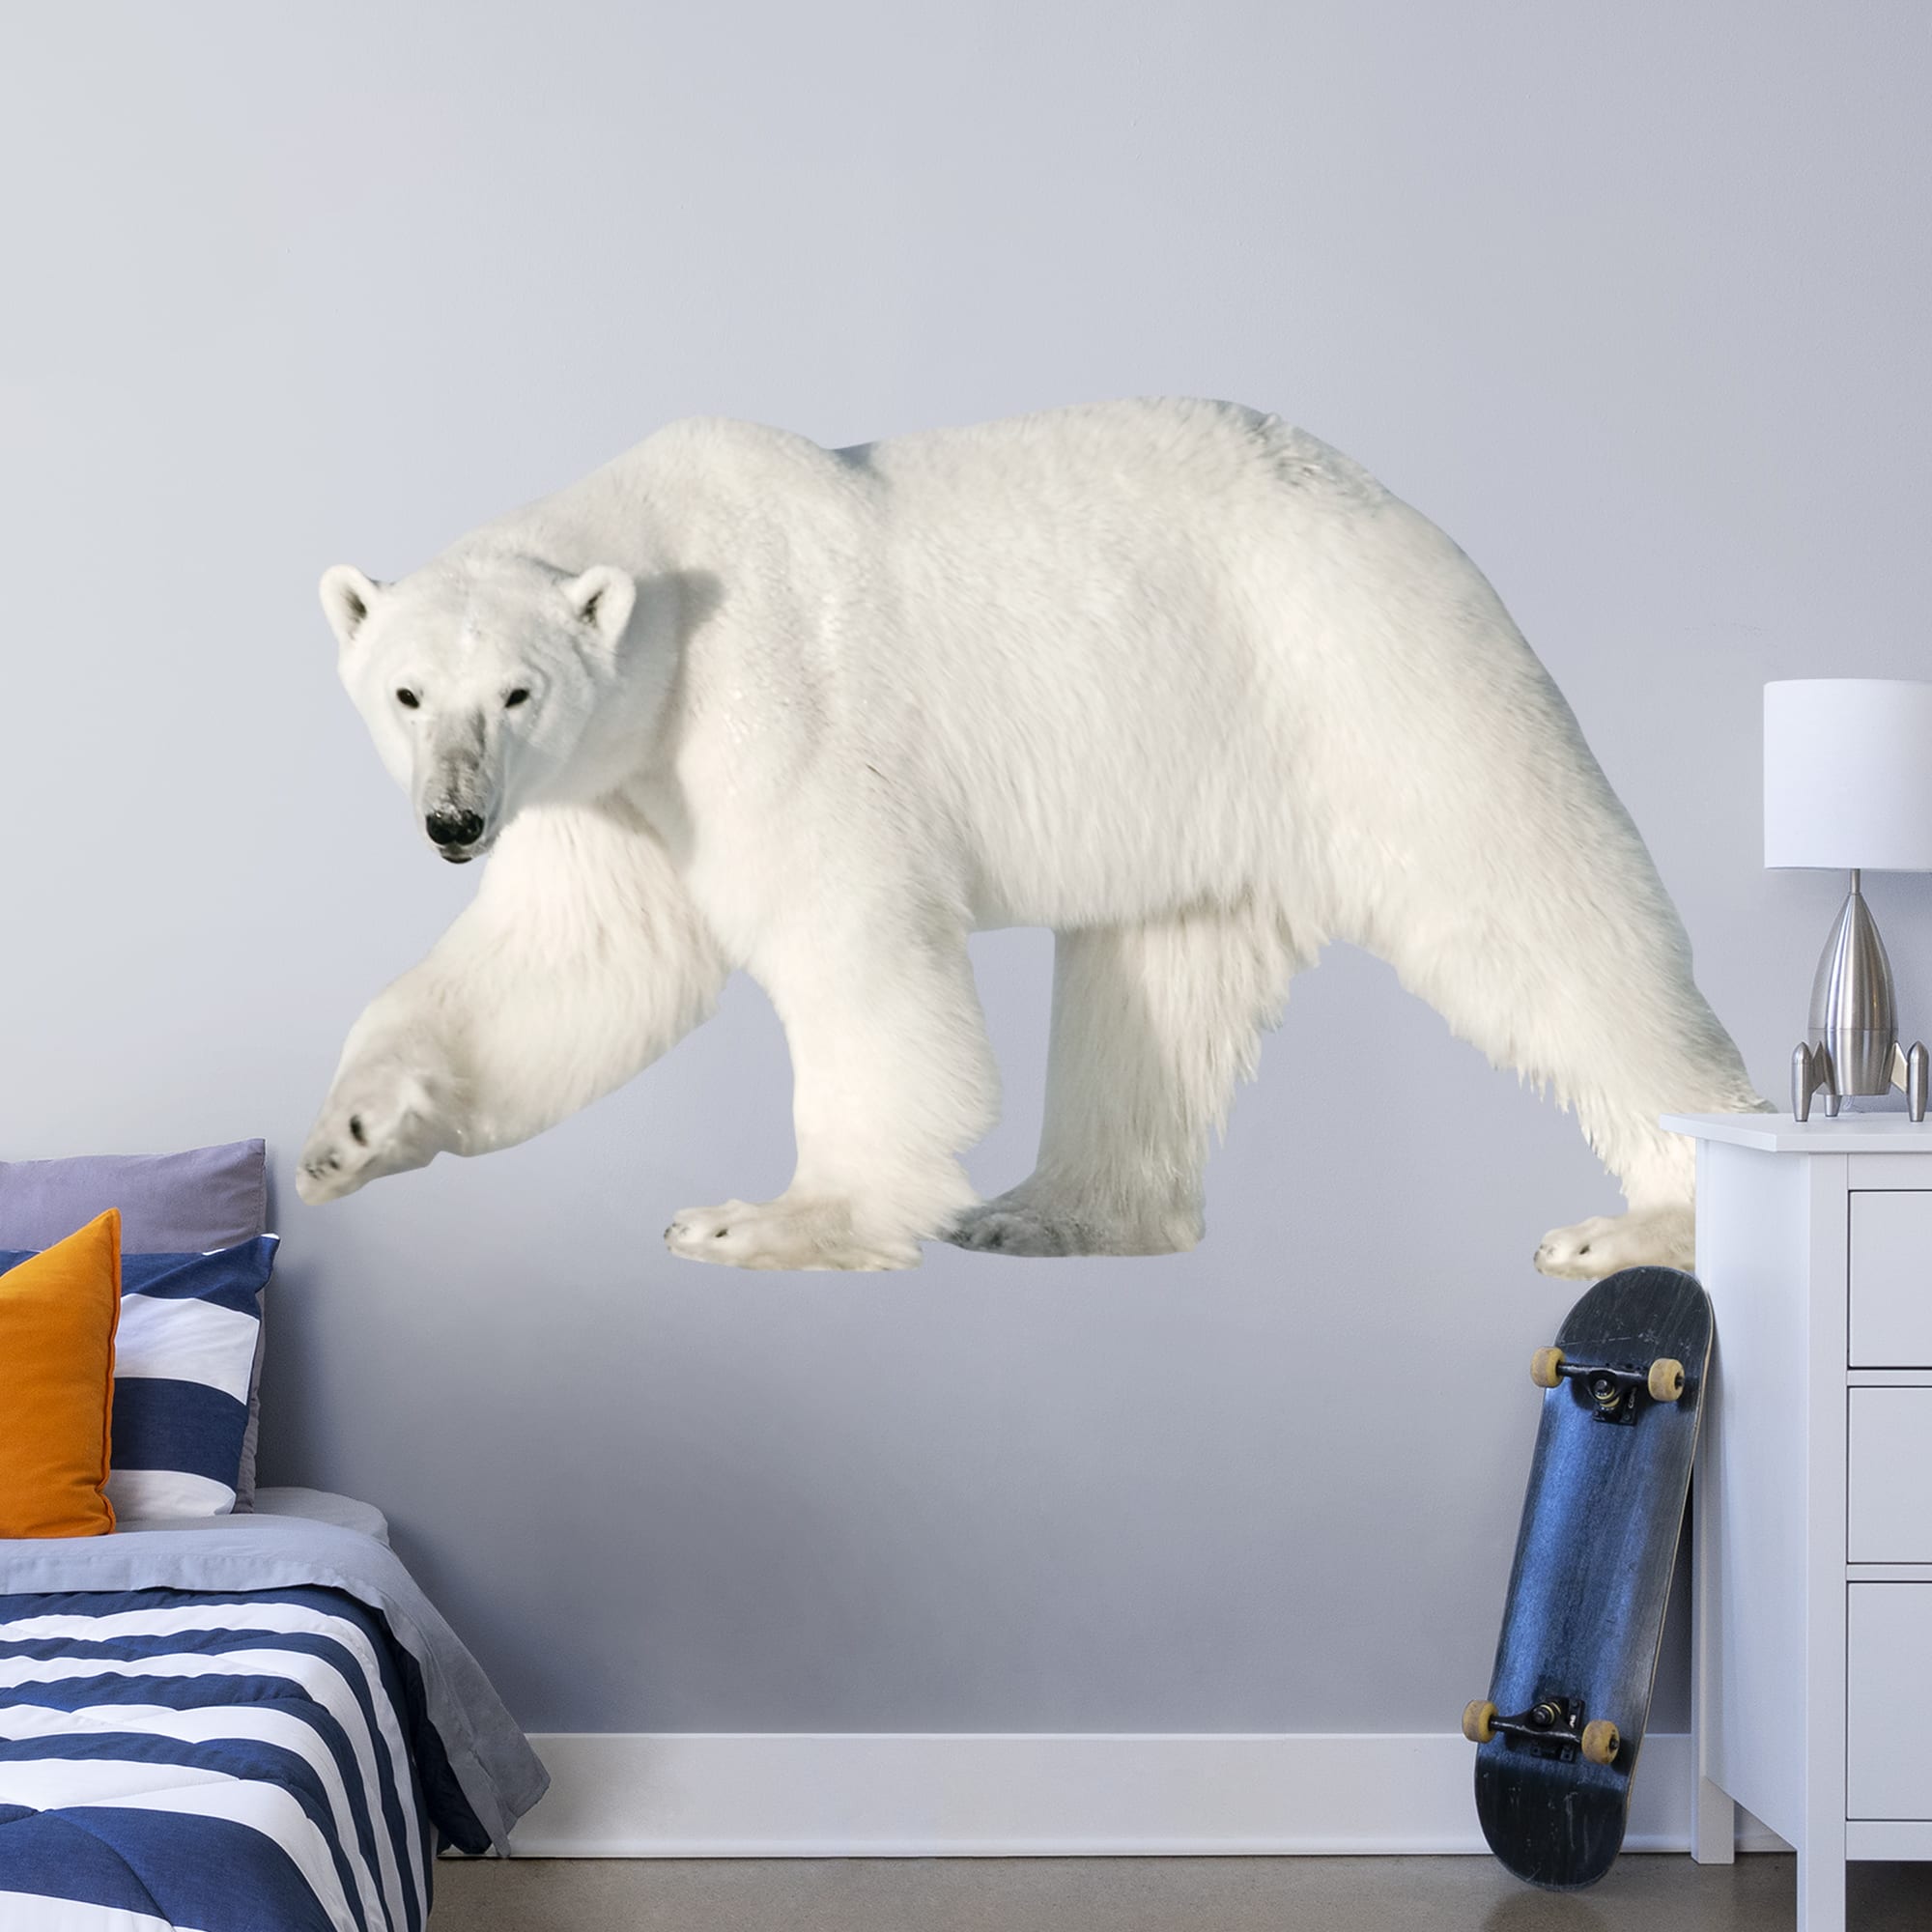 Polar Bear - Removable Vinyl Decal Life-Size Animal + 2 Decals (78"W x 47"H) by Fathead